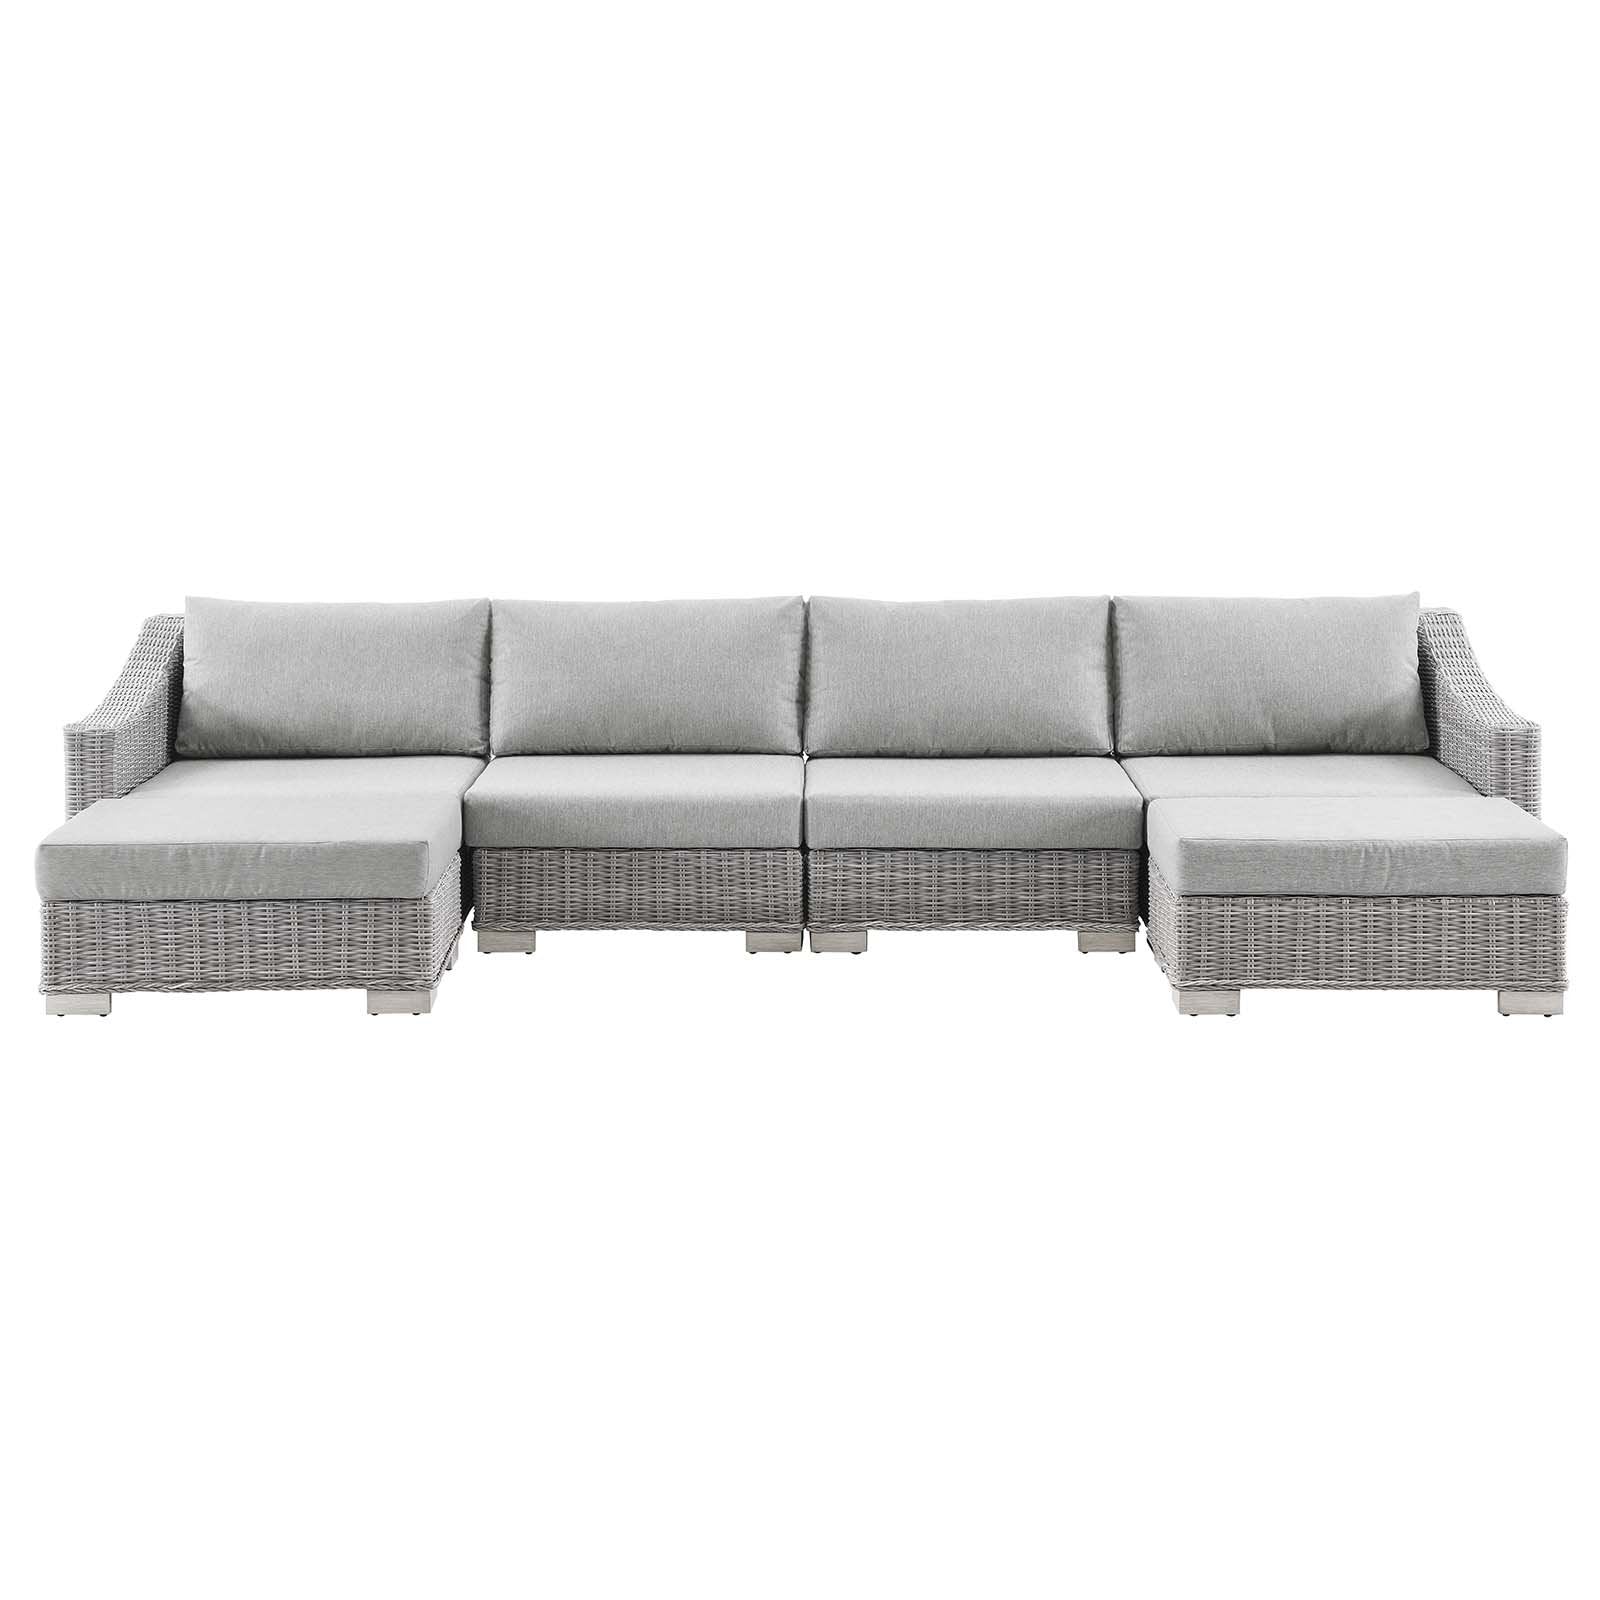 Conway Outdoor Patio Wicker Rattan 6-Piece Sectional Sofa Furniture Set - East Shore Modern Home Furnishings